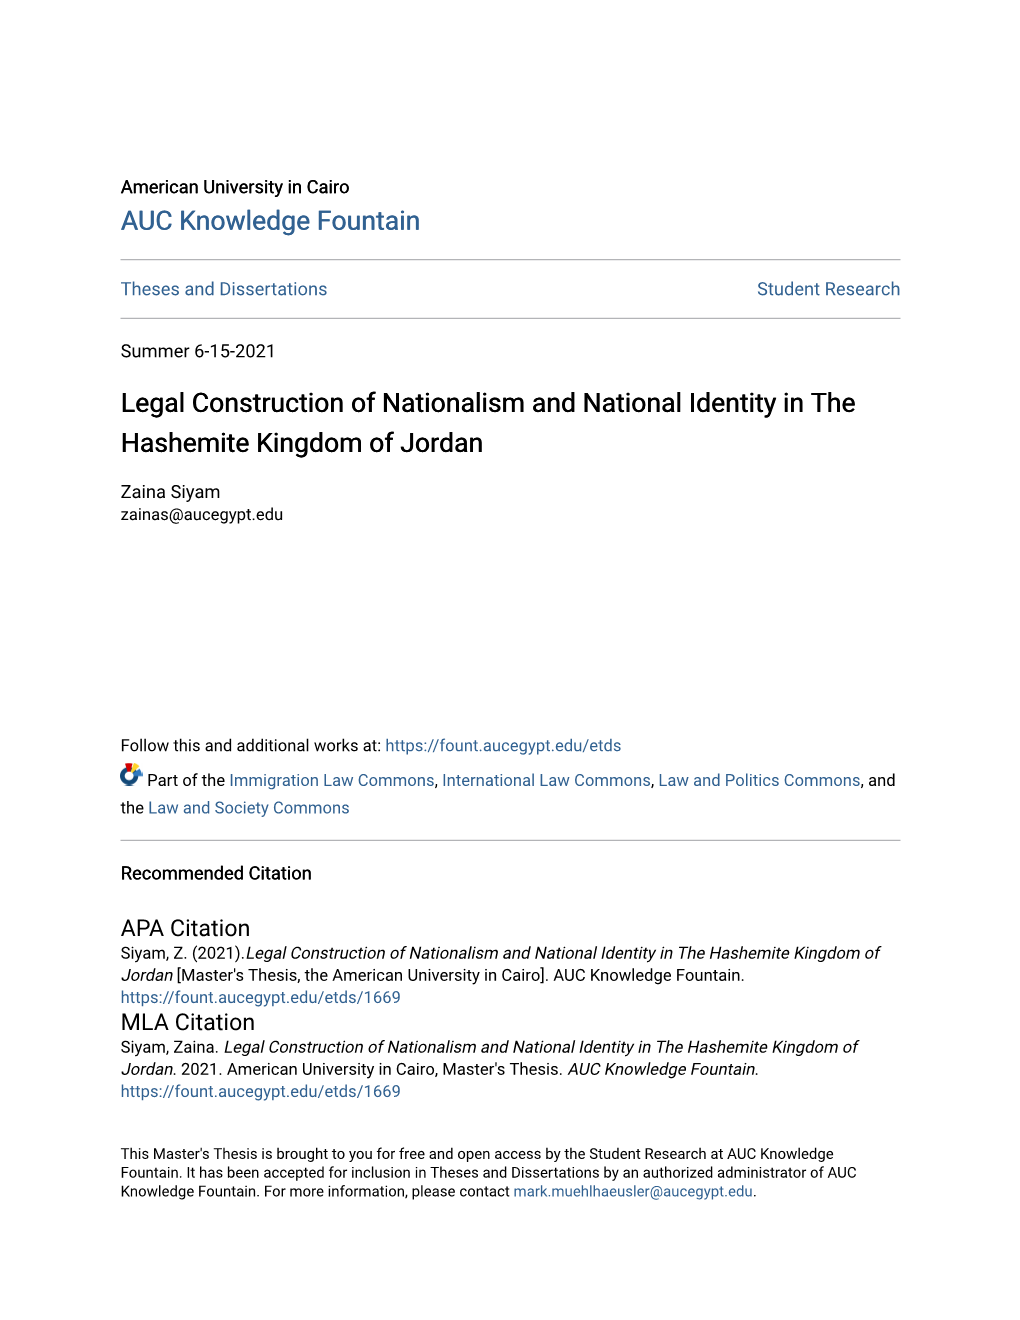 Legal Construction of Nationalism and National Identity in the Hashemite Kingdom of Jordan